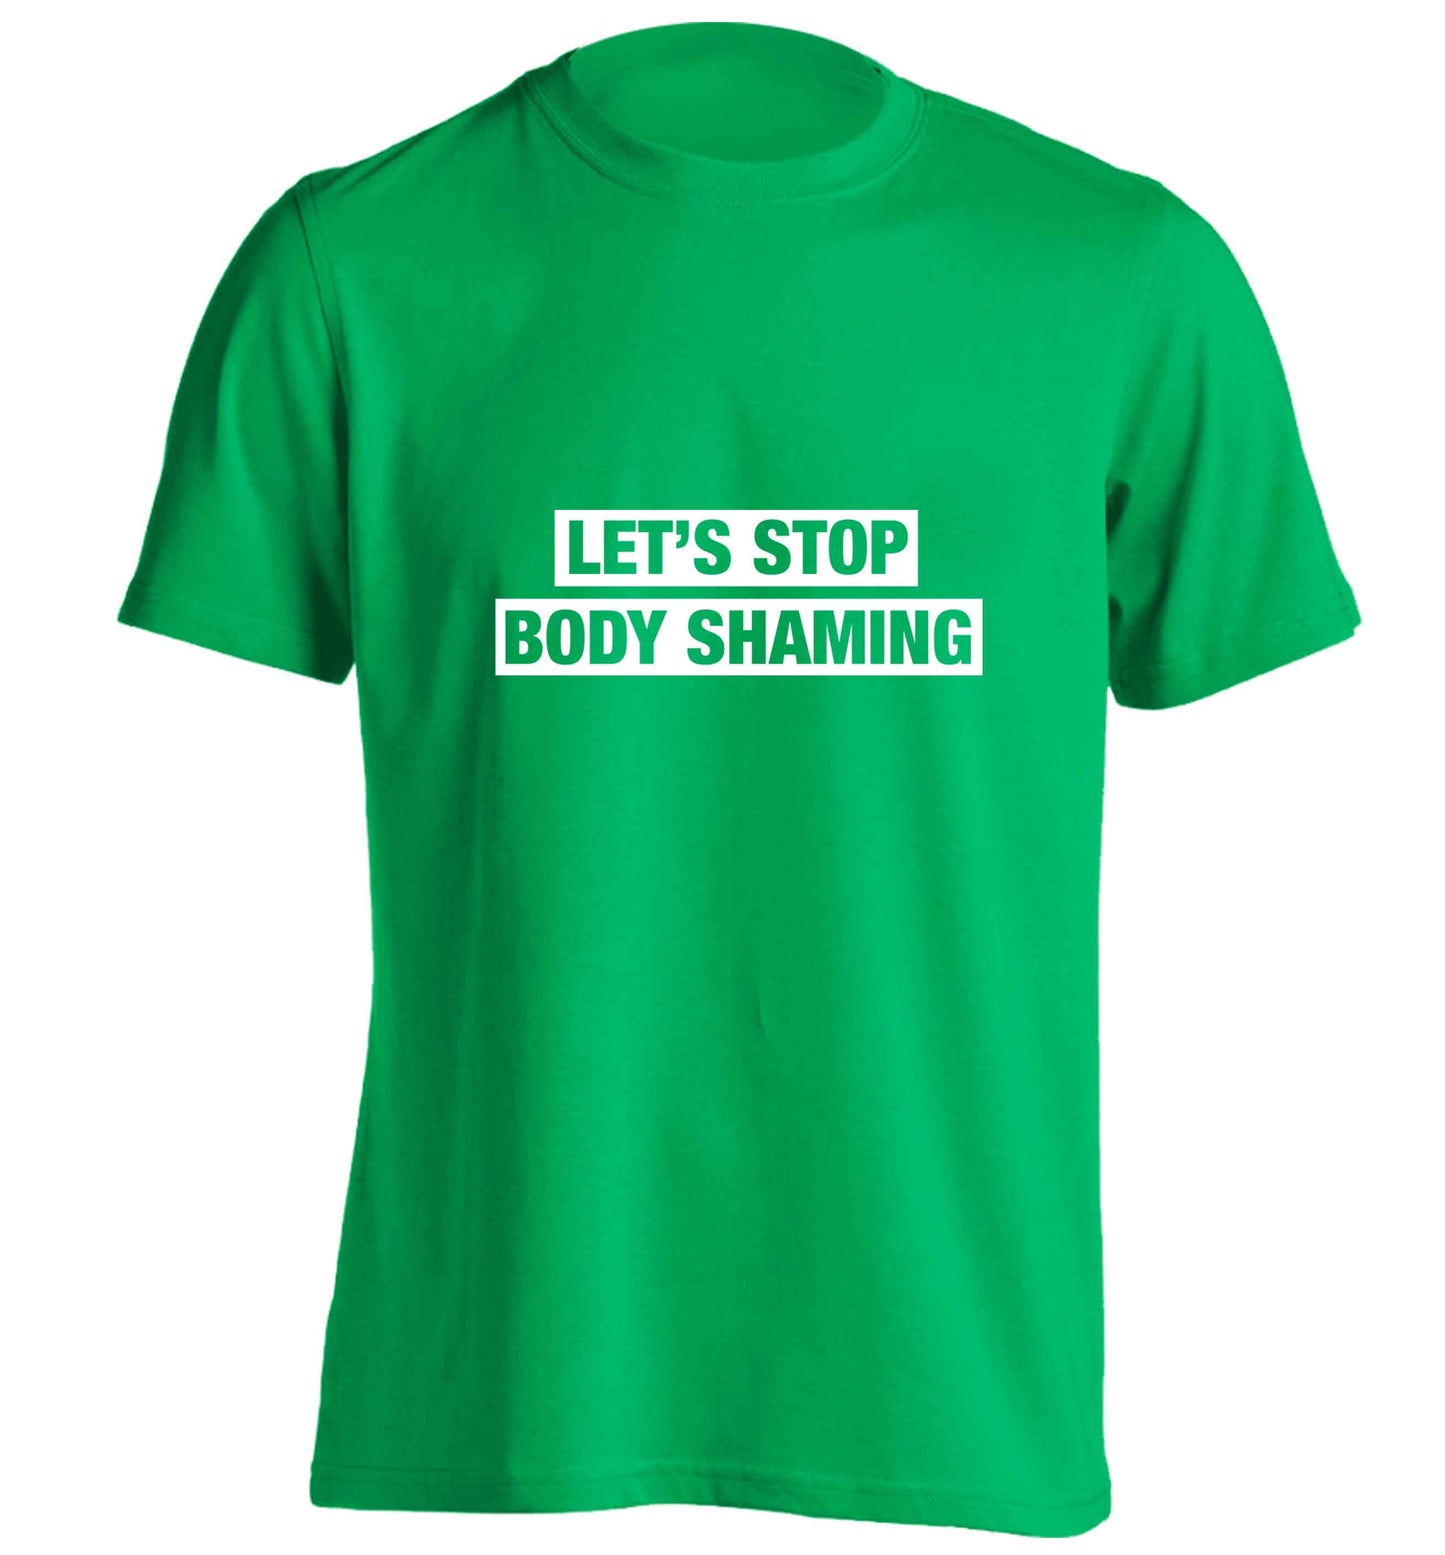 Let's stop body shaming adults unisex green Tshirt 2XL